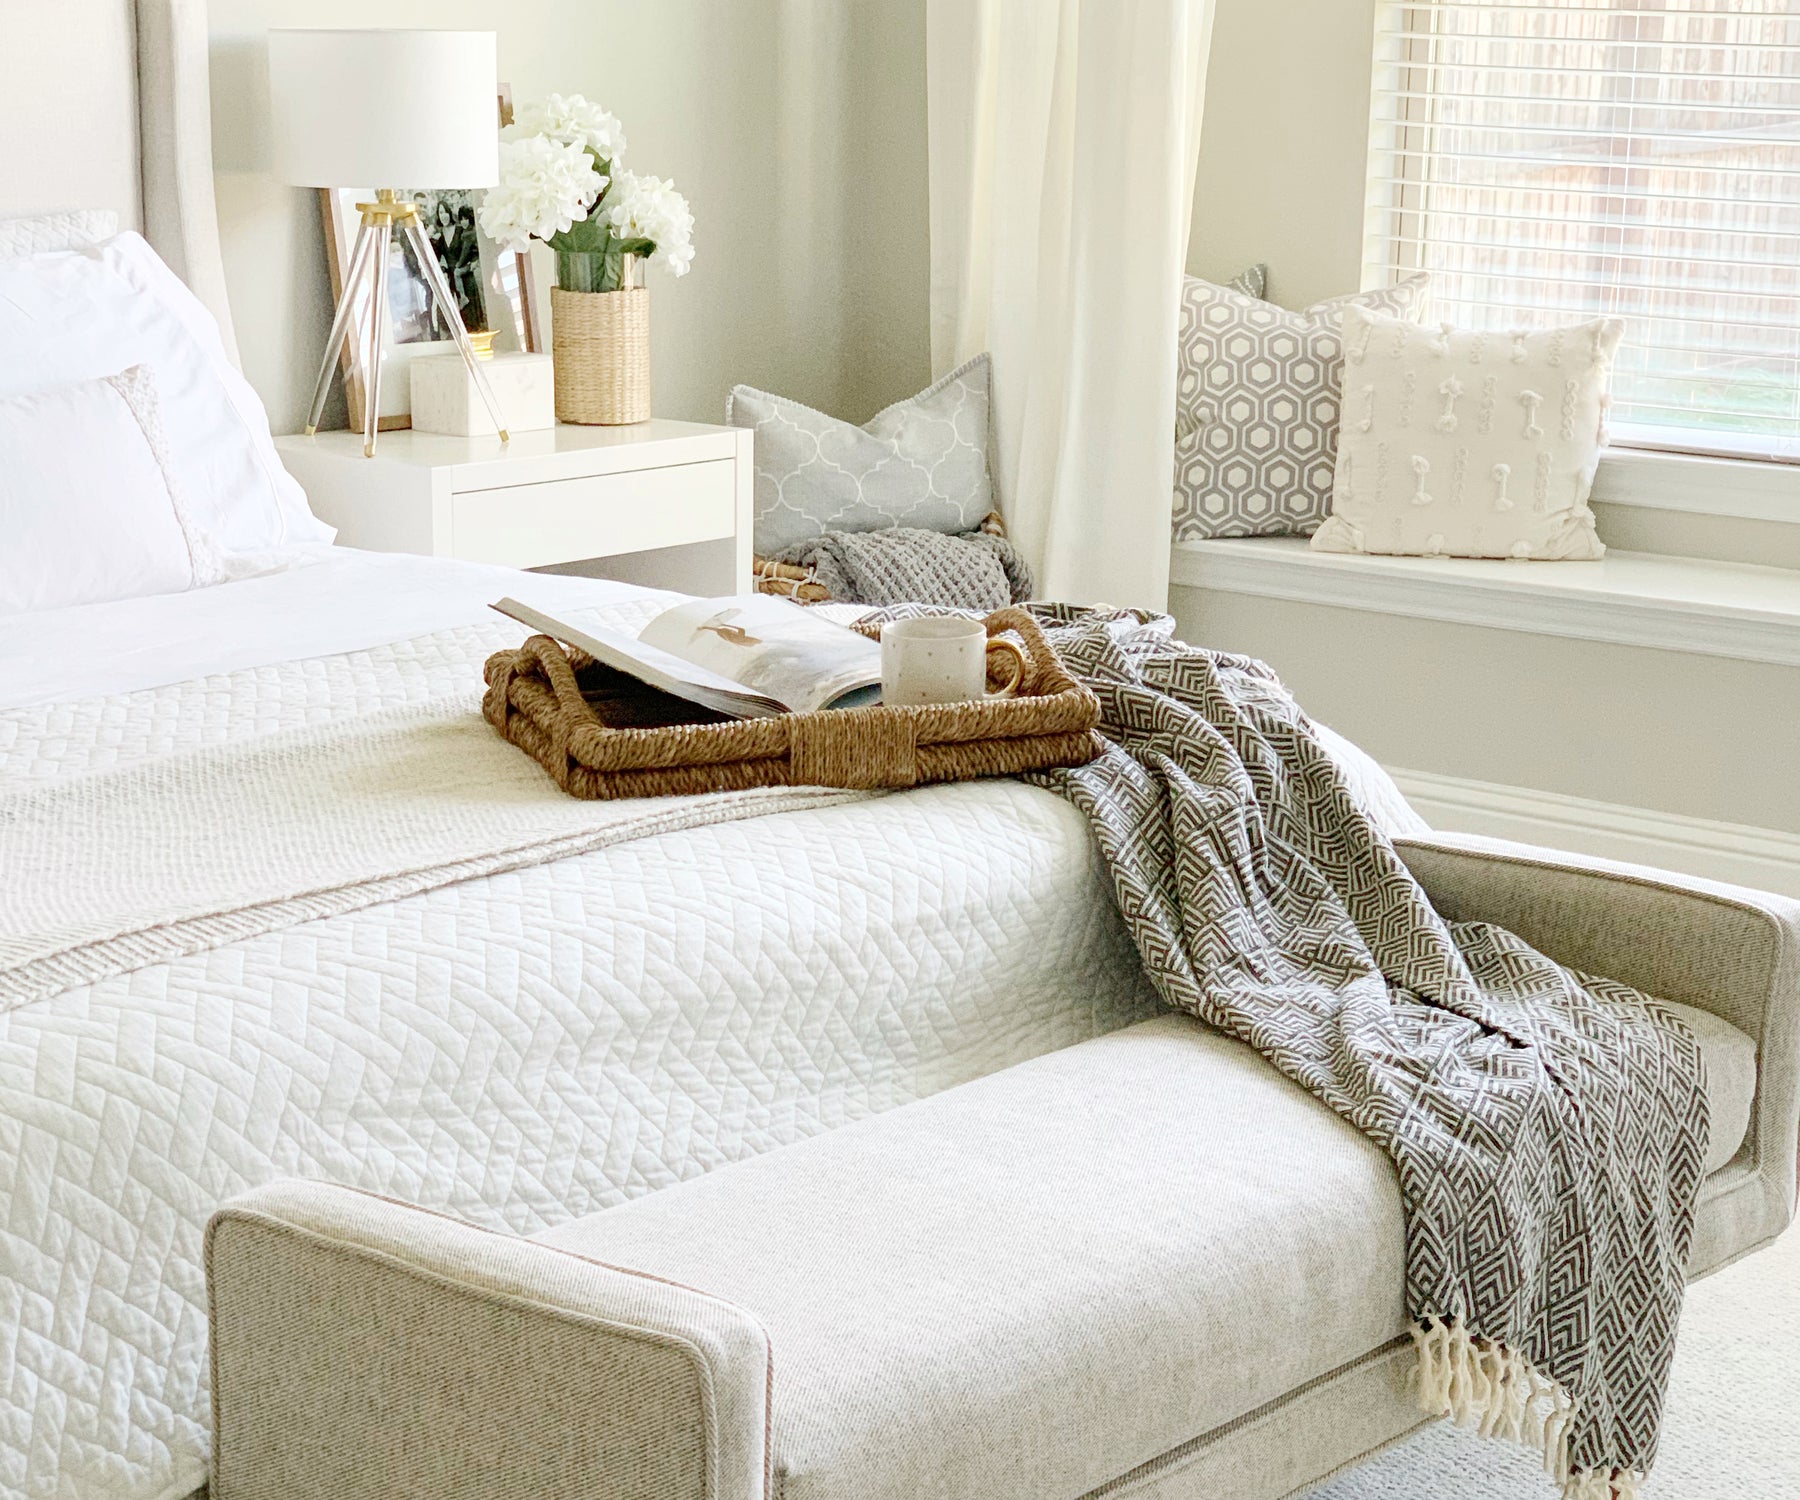 Bed adorned with white cotton fitted sheets and a matching blanket